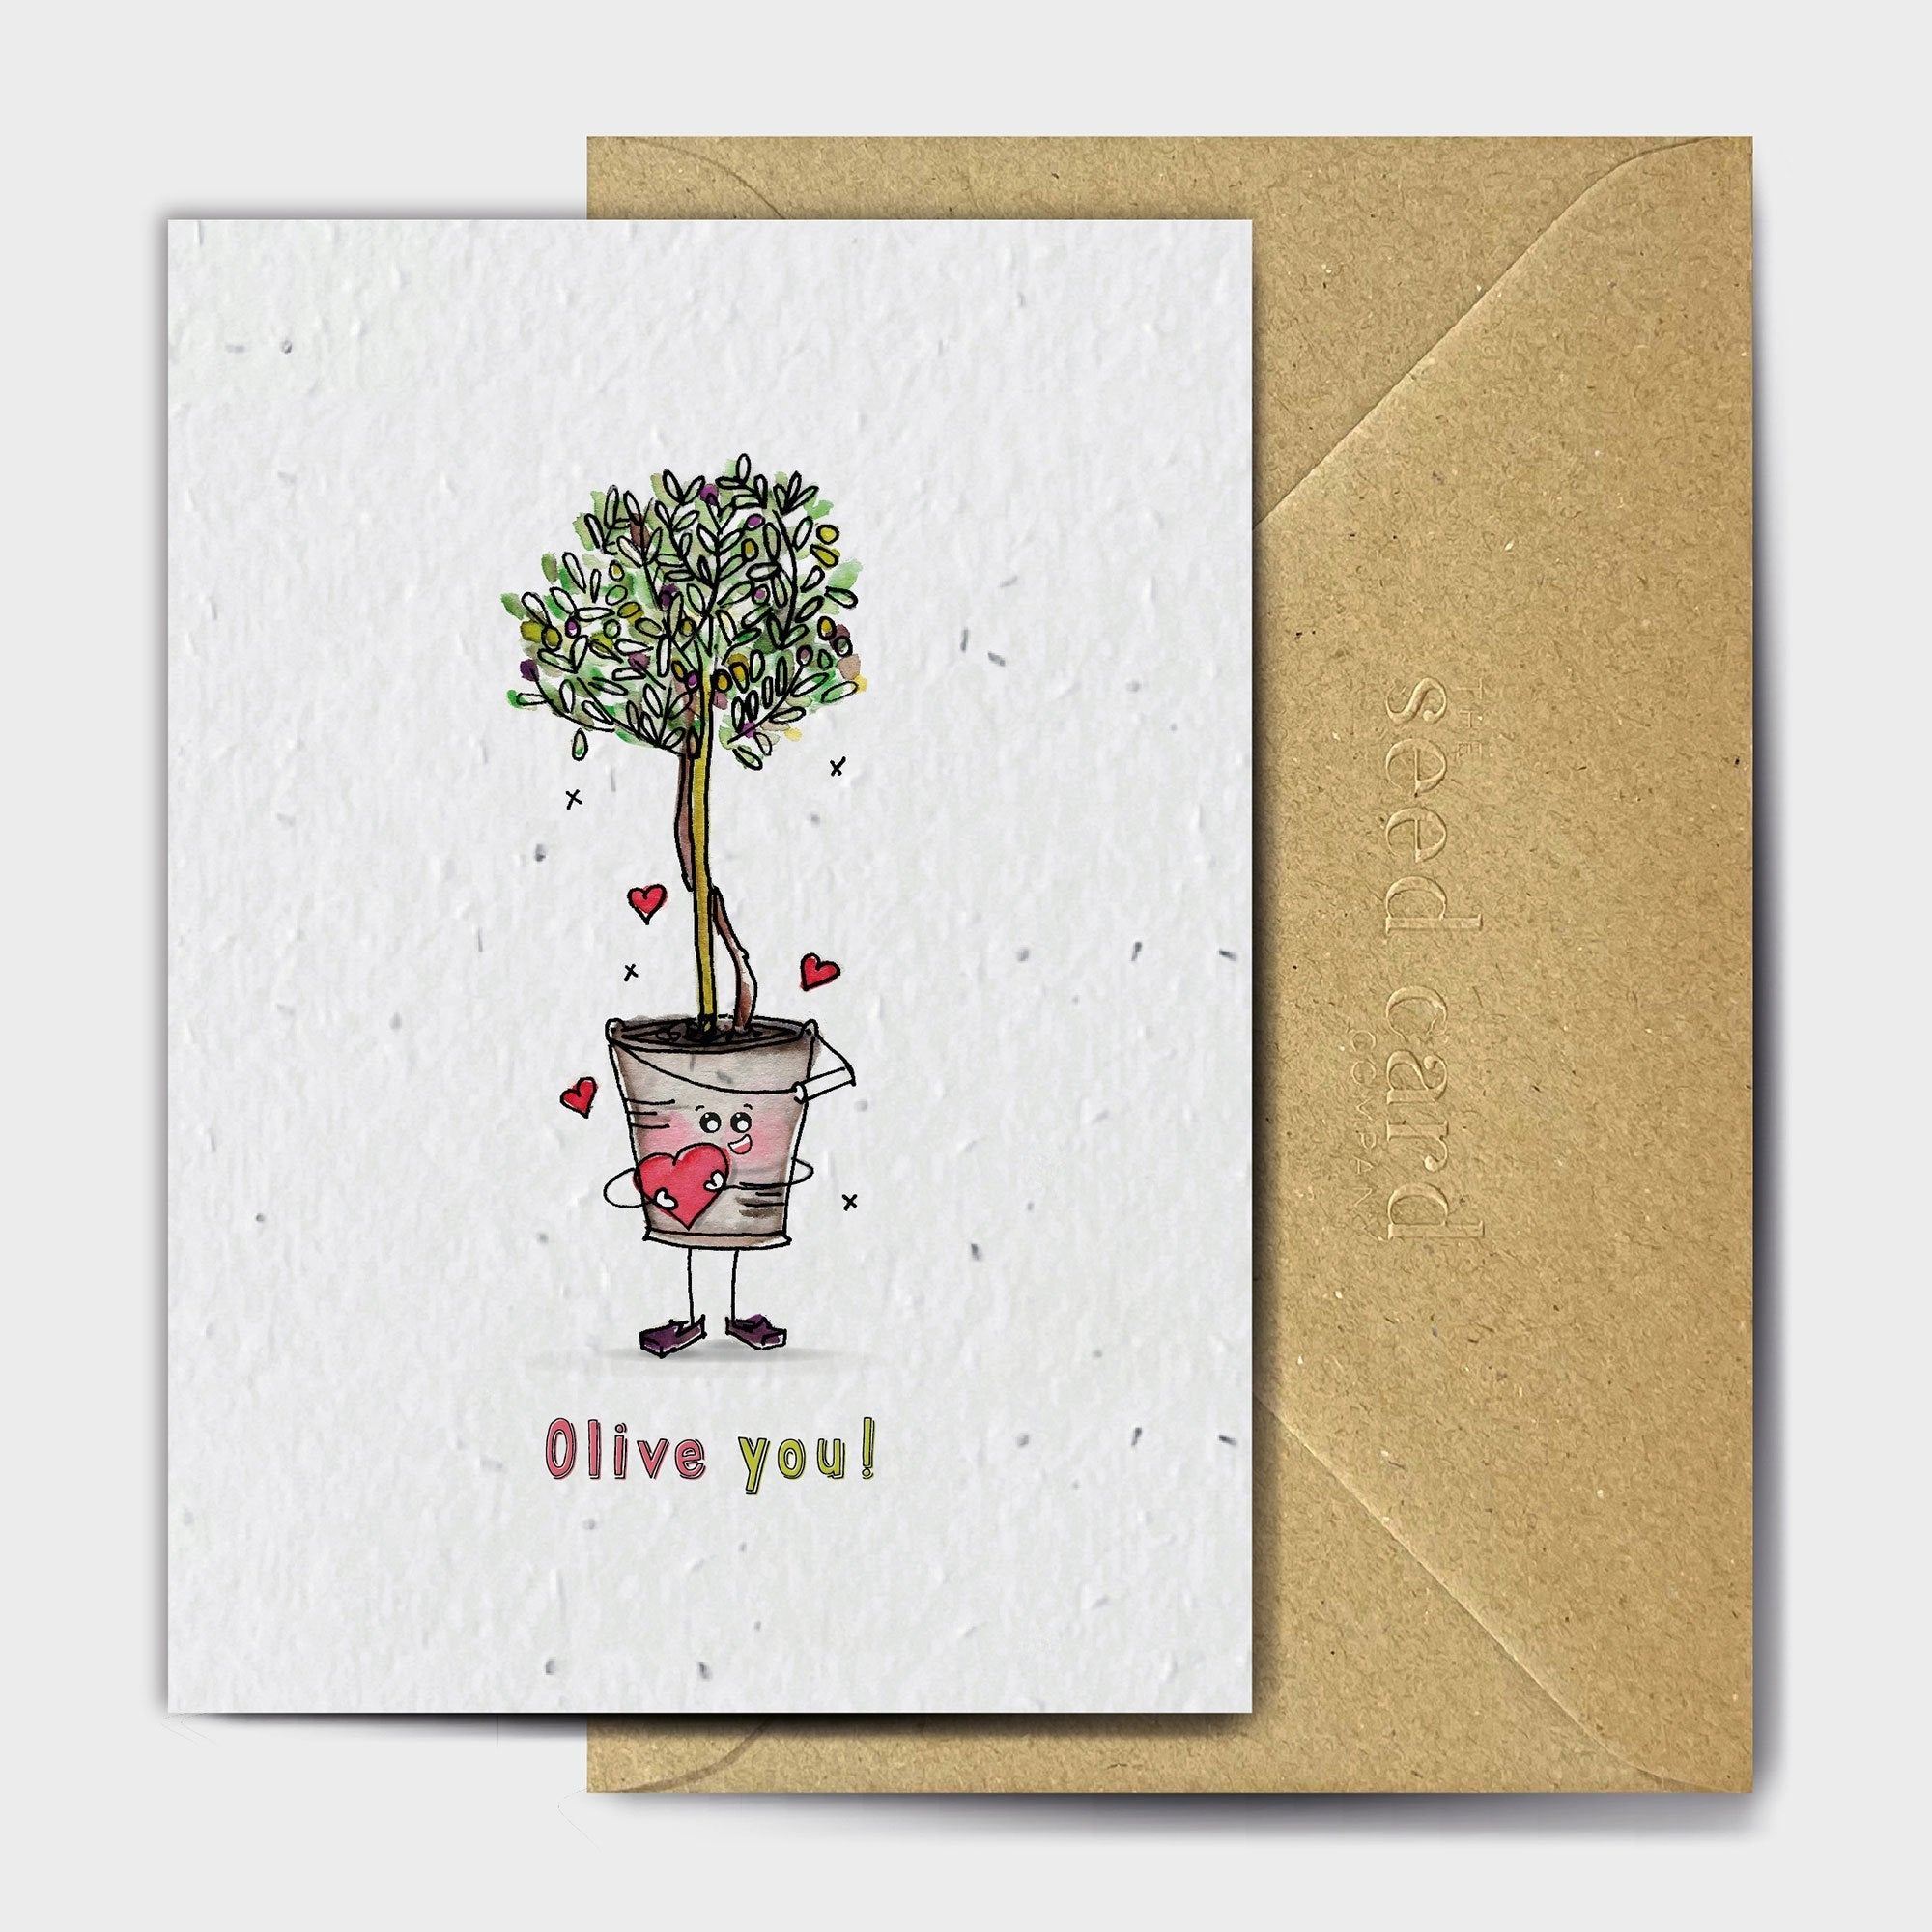 Olive You! - Seed Card